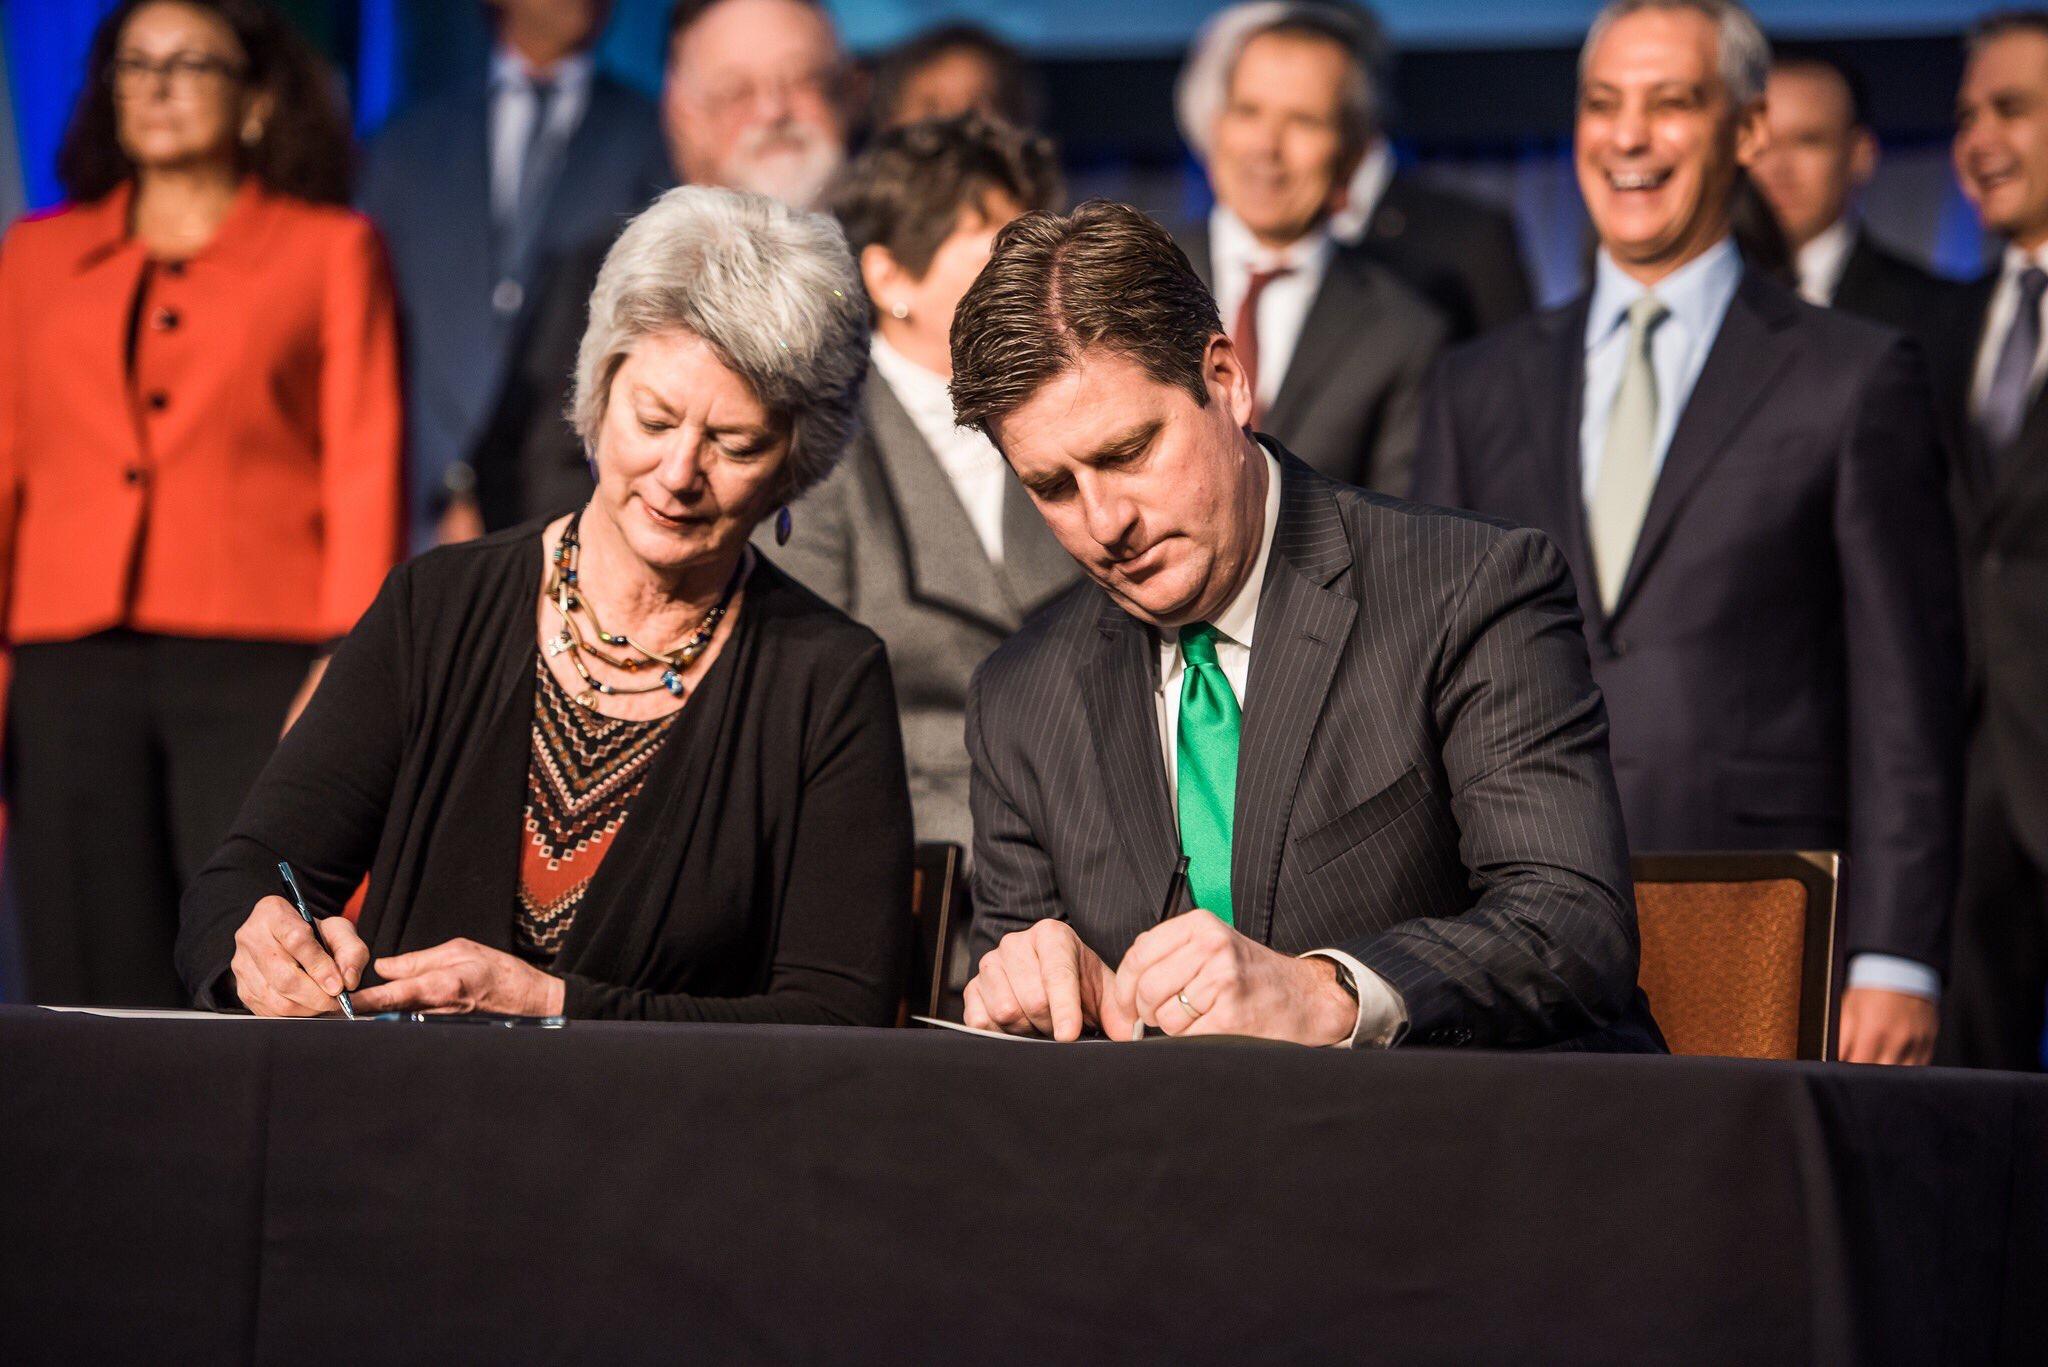 Pittsboro, N.C. Mayor Cindy Perry and Pittsburgh Mayor Bill Peduto sign the Chicago Climate Charter on Tuesday. (Courtesy City of Pittsburgh)